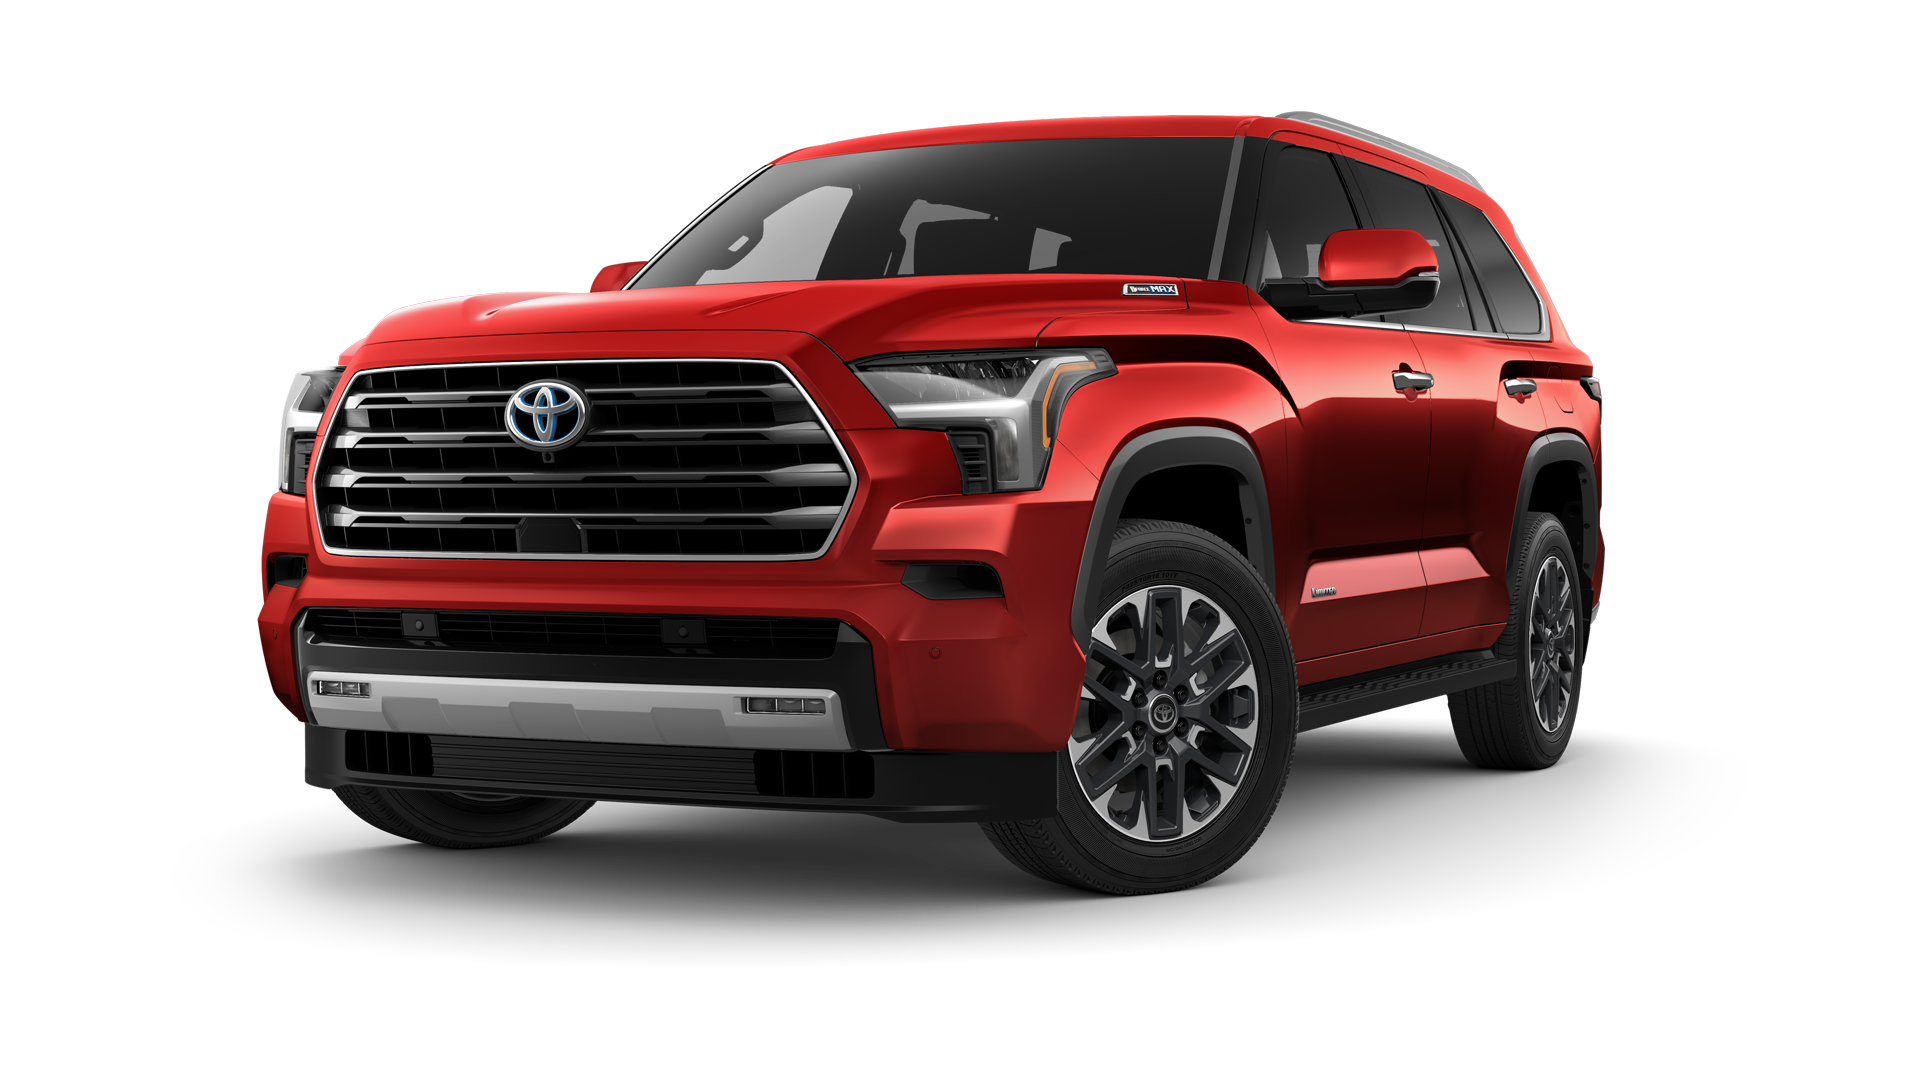 2023 Toyota Sequoia in Supersonic Red*.